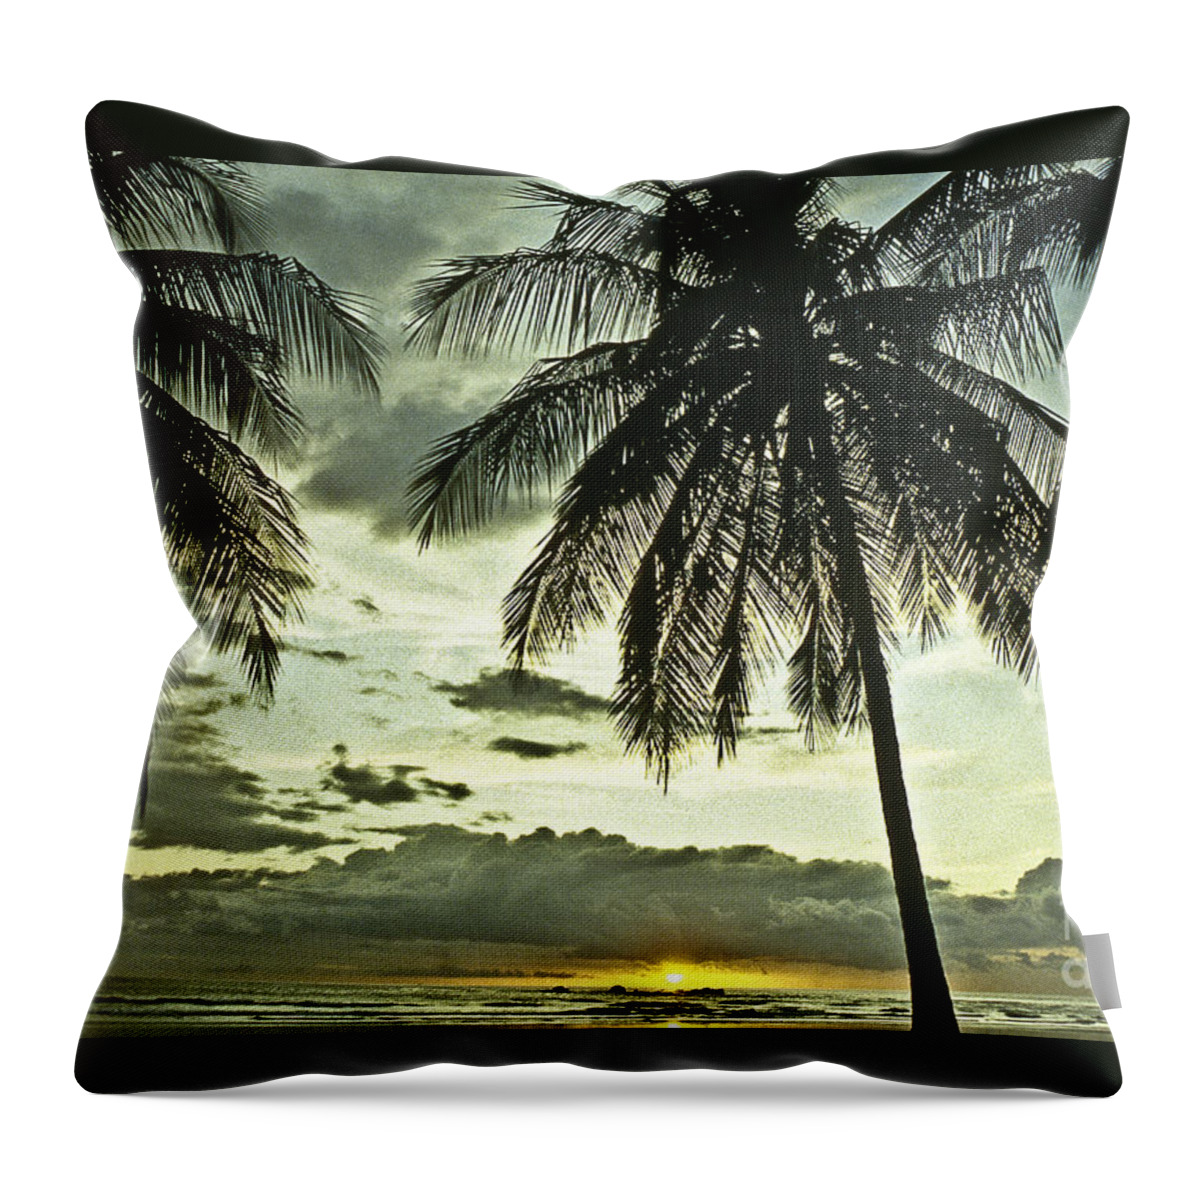 Landscape Throw Pillow featuring the photograph Scenic evening by Heiko Koehrer-Wagner